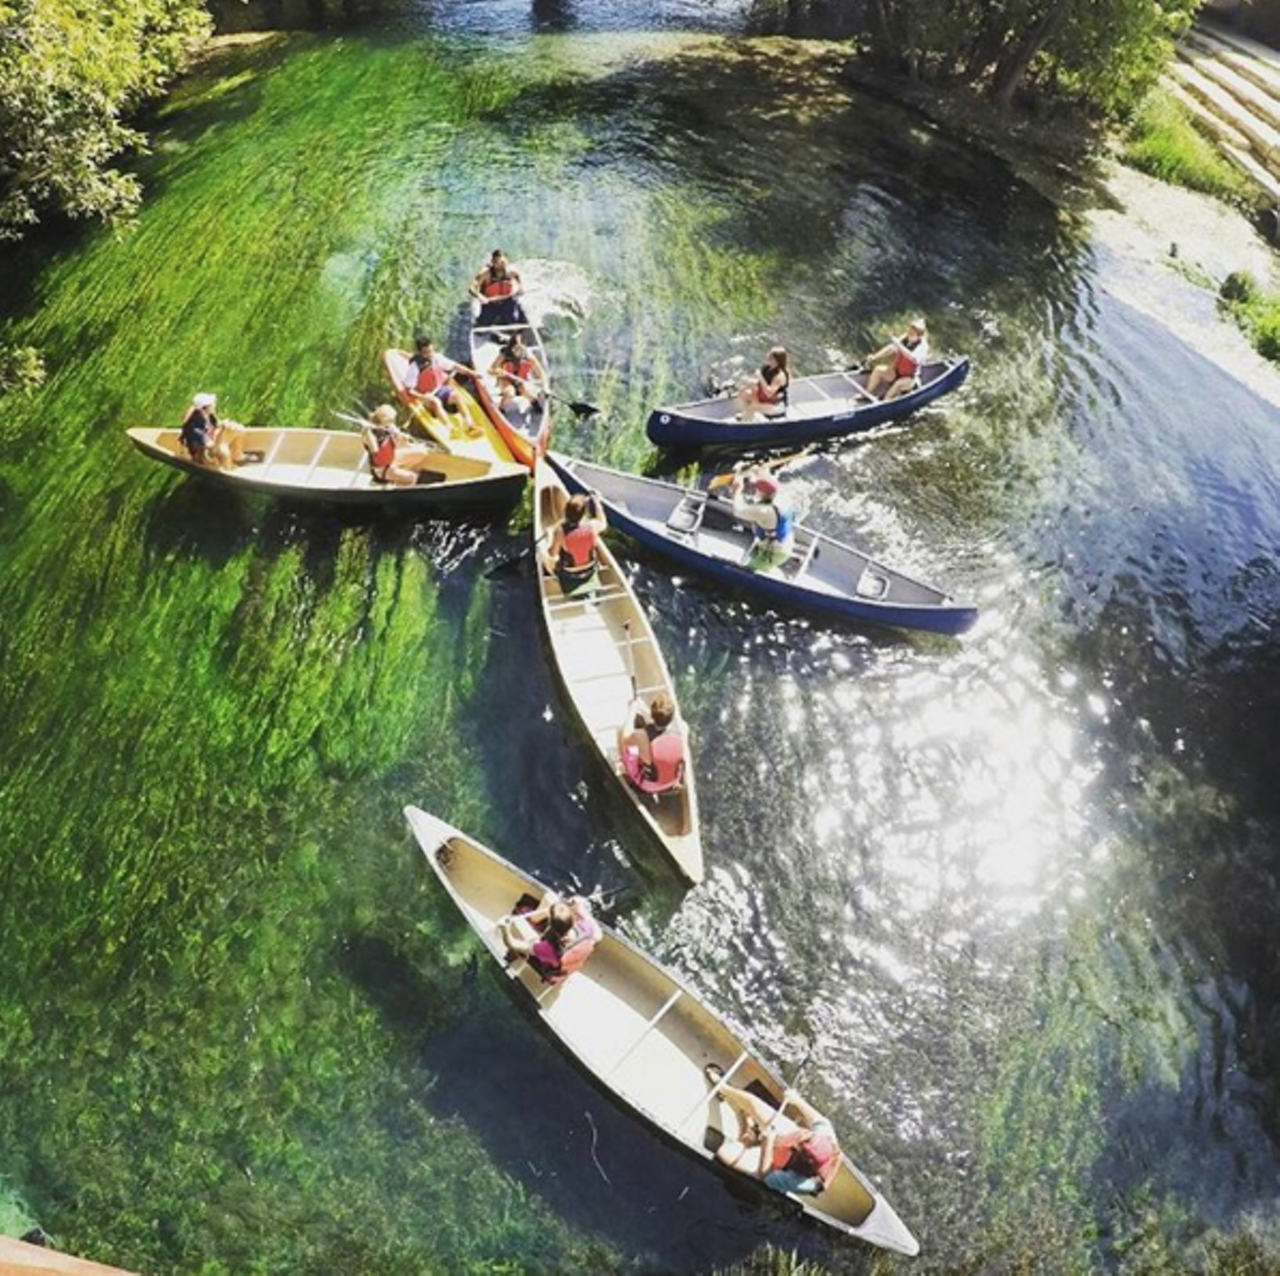 San Marcos River
The San Marcos River is only half an hour away and is a great place to swim, kayak, tube and possibly anything else you can do in the water. The river is known to be packed with college students in summer &#151; so if that's not your thing, consider yourself warned. 
Photo via Instagram/inertiatoursspringbreak